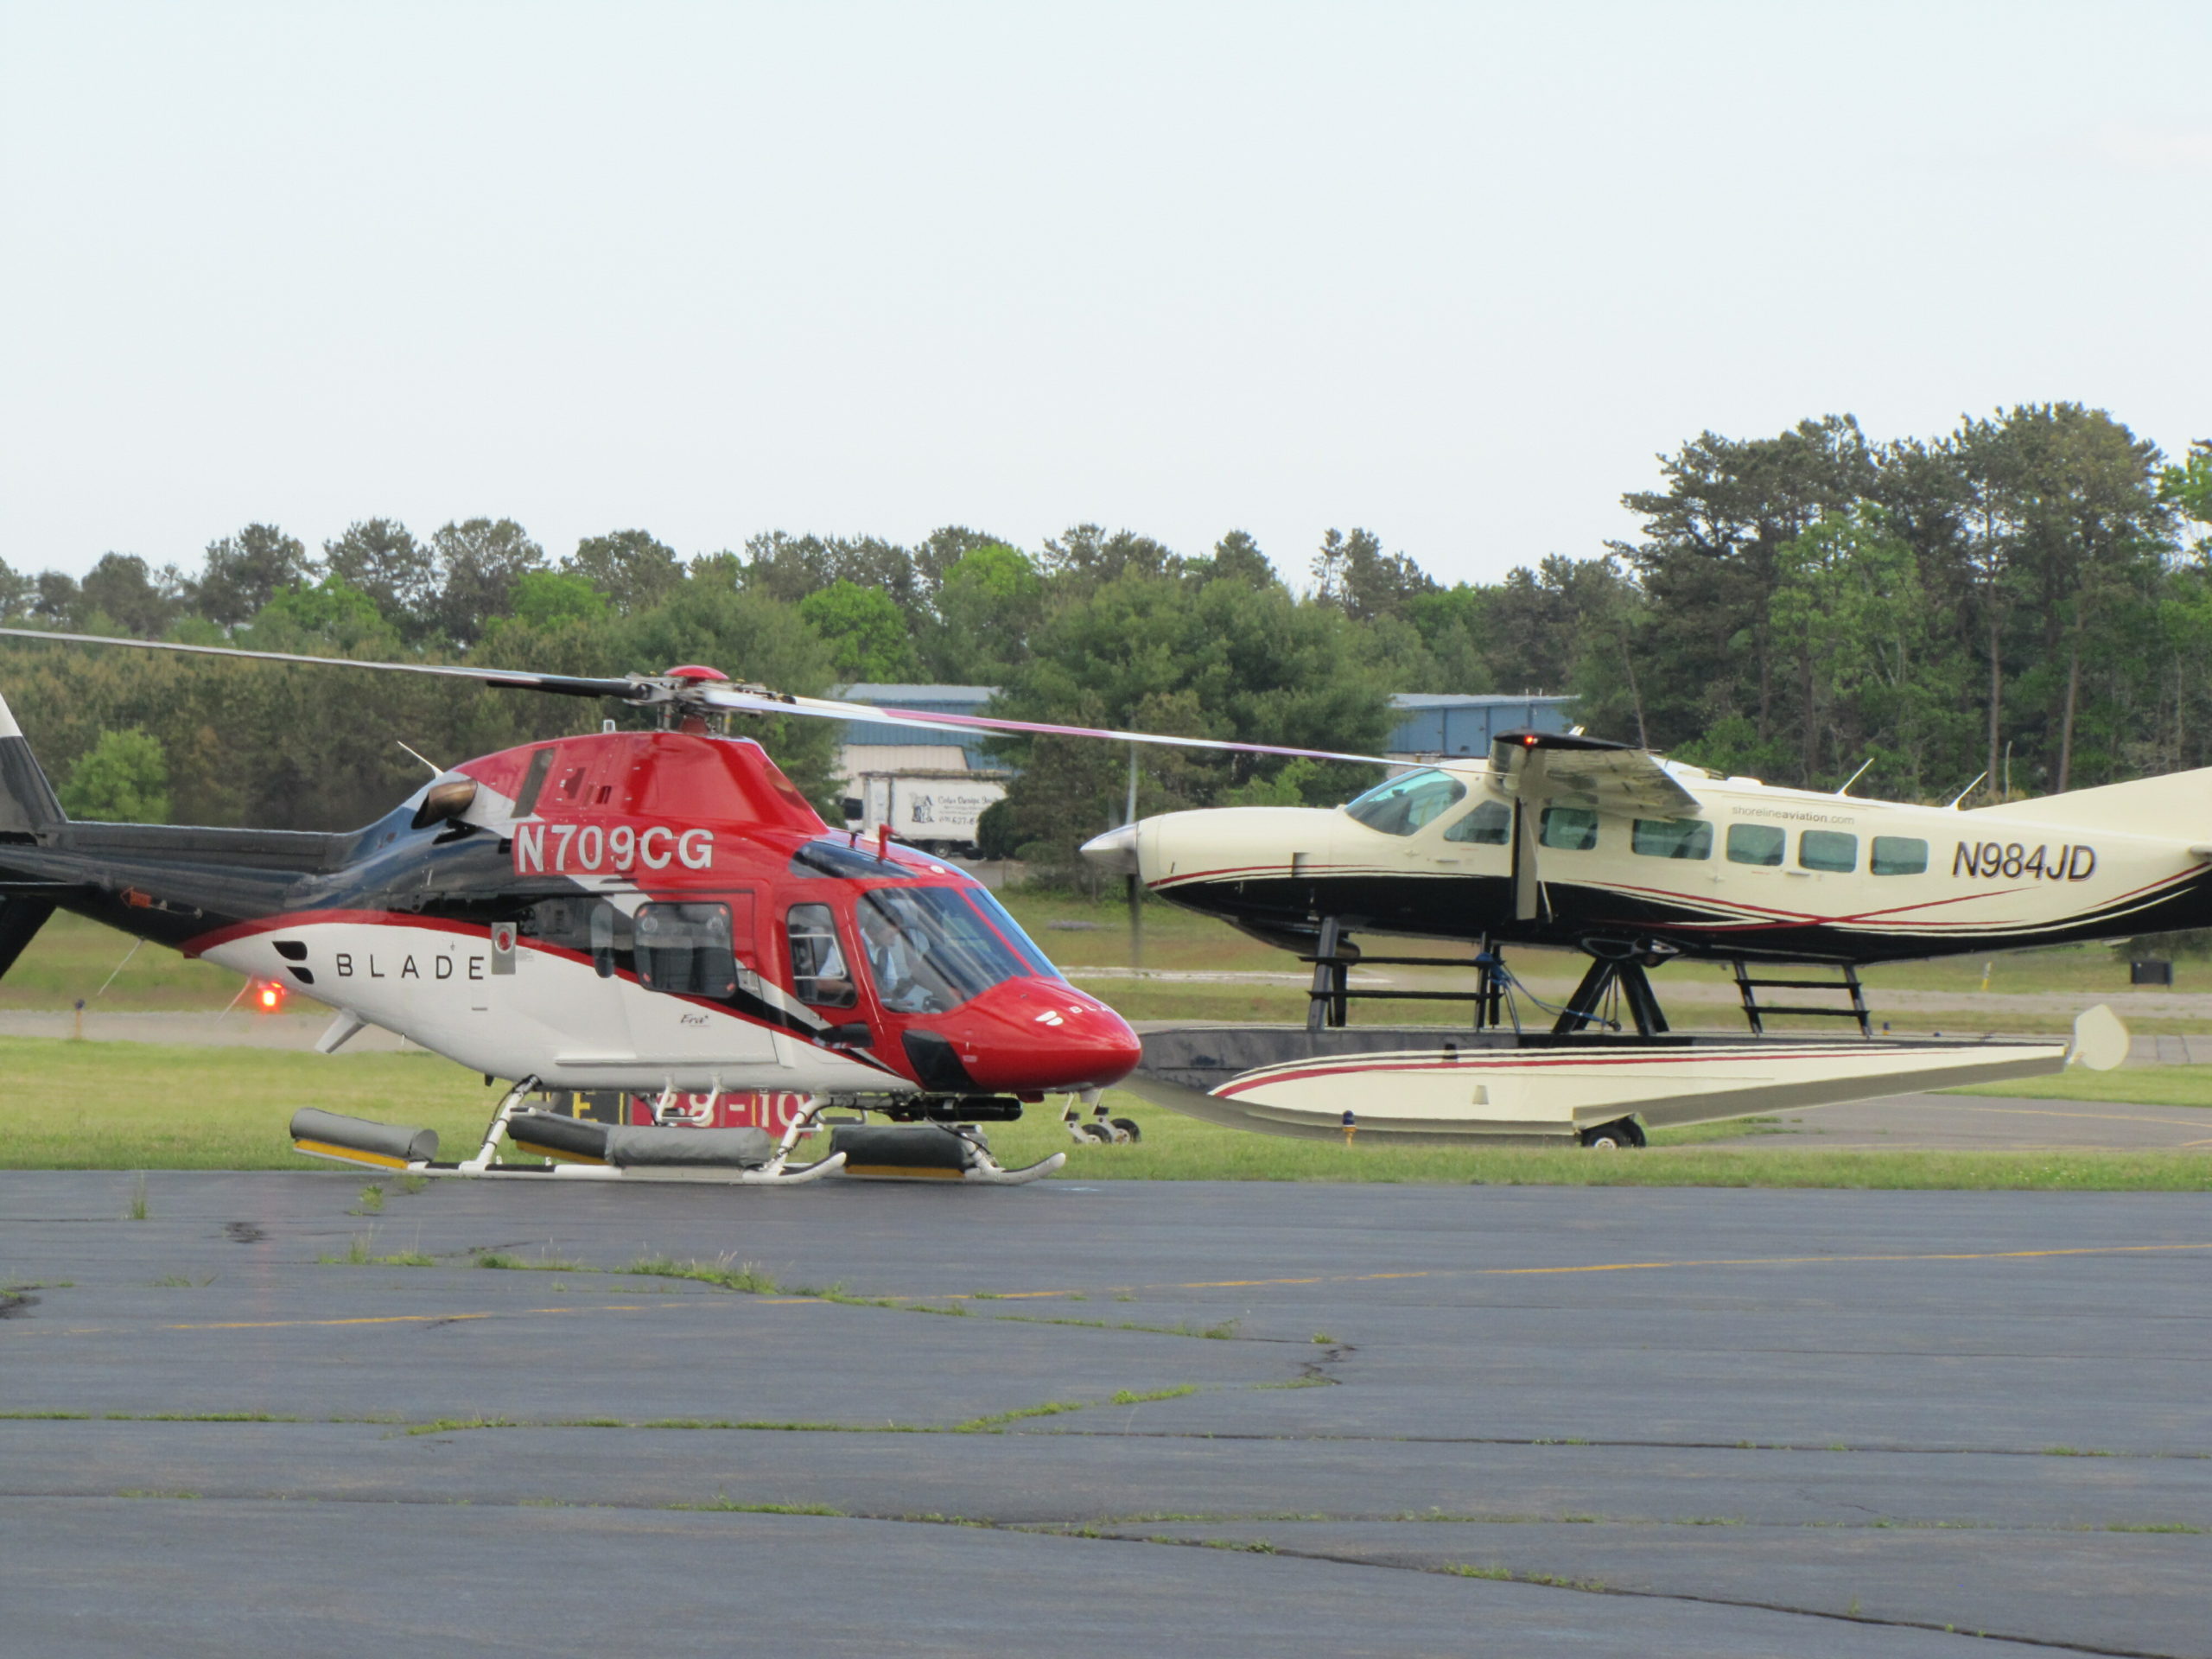 Helicopter traffic at East Hampton Airport was down 90 percent this past weekend and the commercial flight booking company Blade said it is shifting more of its Manhattan-to-East Hampton flights from helicopters to seaplanes, both in response to the coronavirus epidemic and for the long term to lessen noise impacts. 